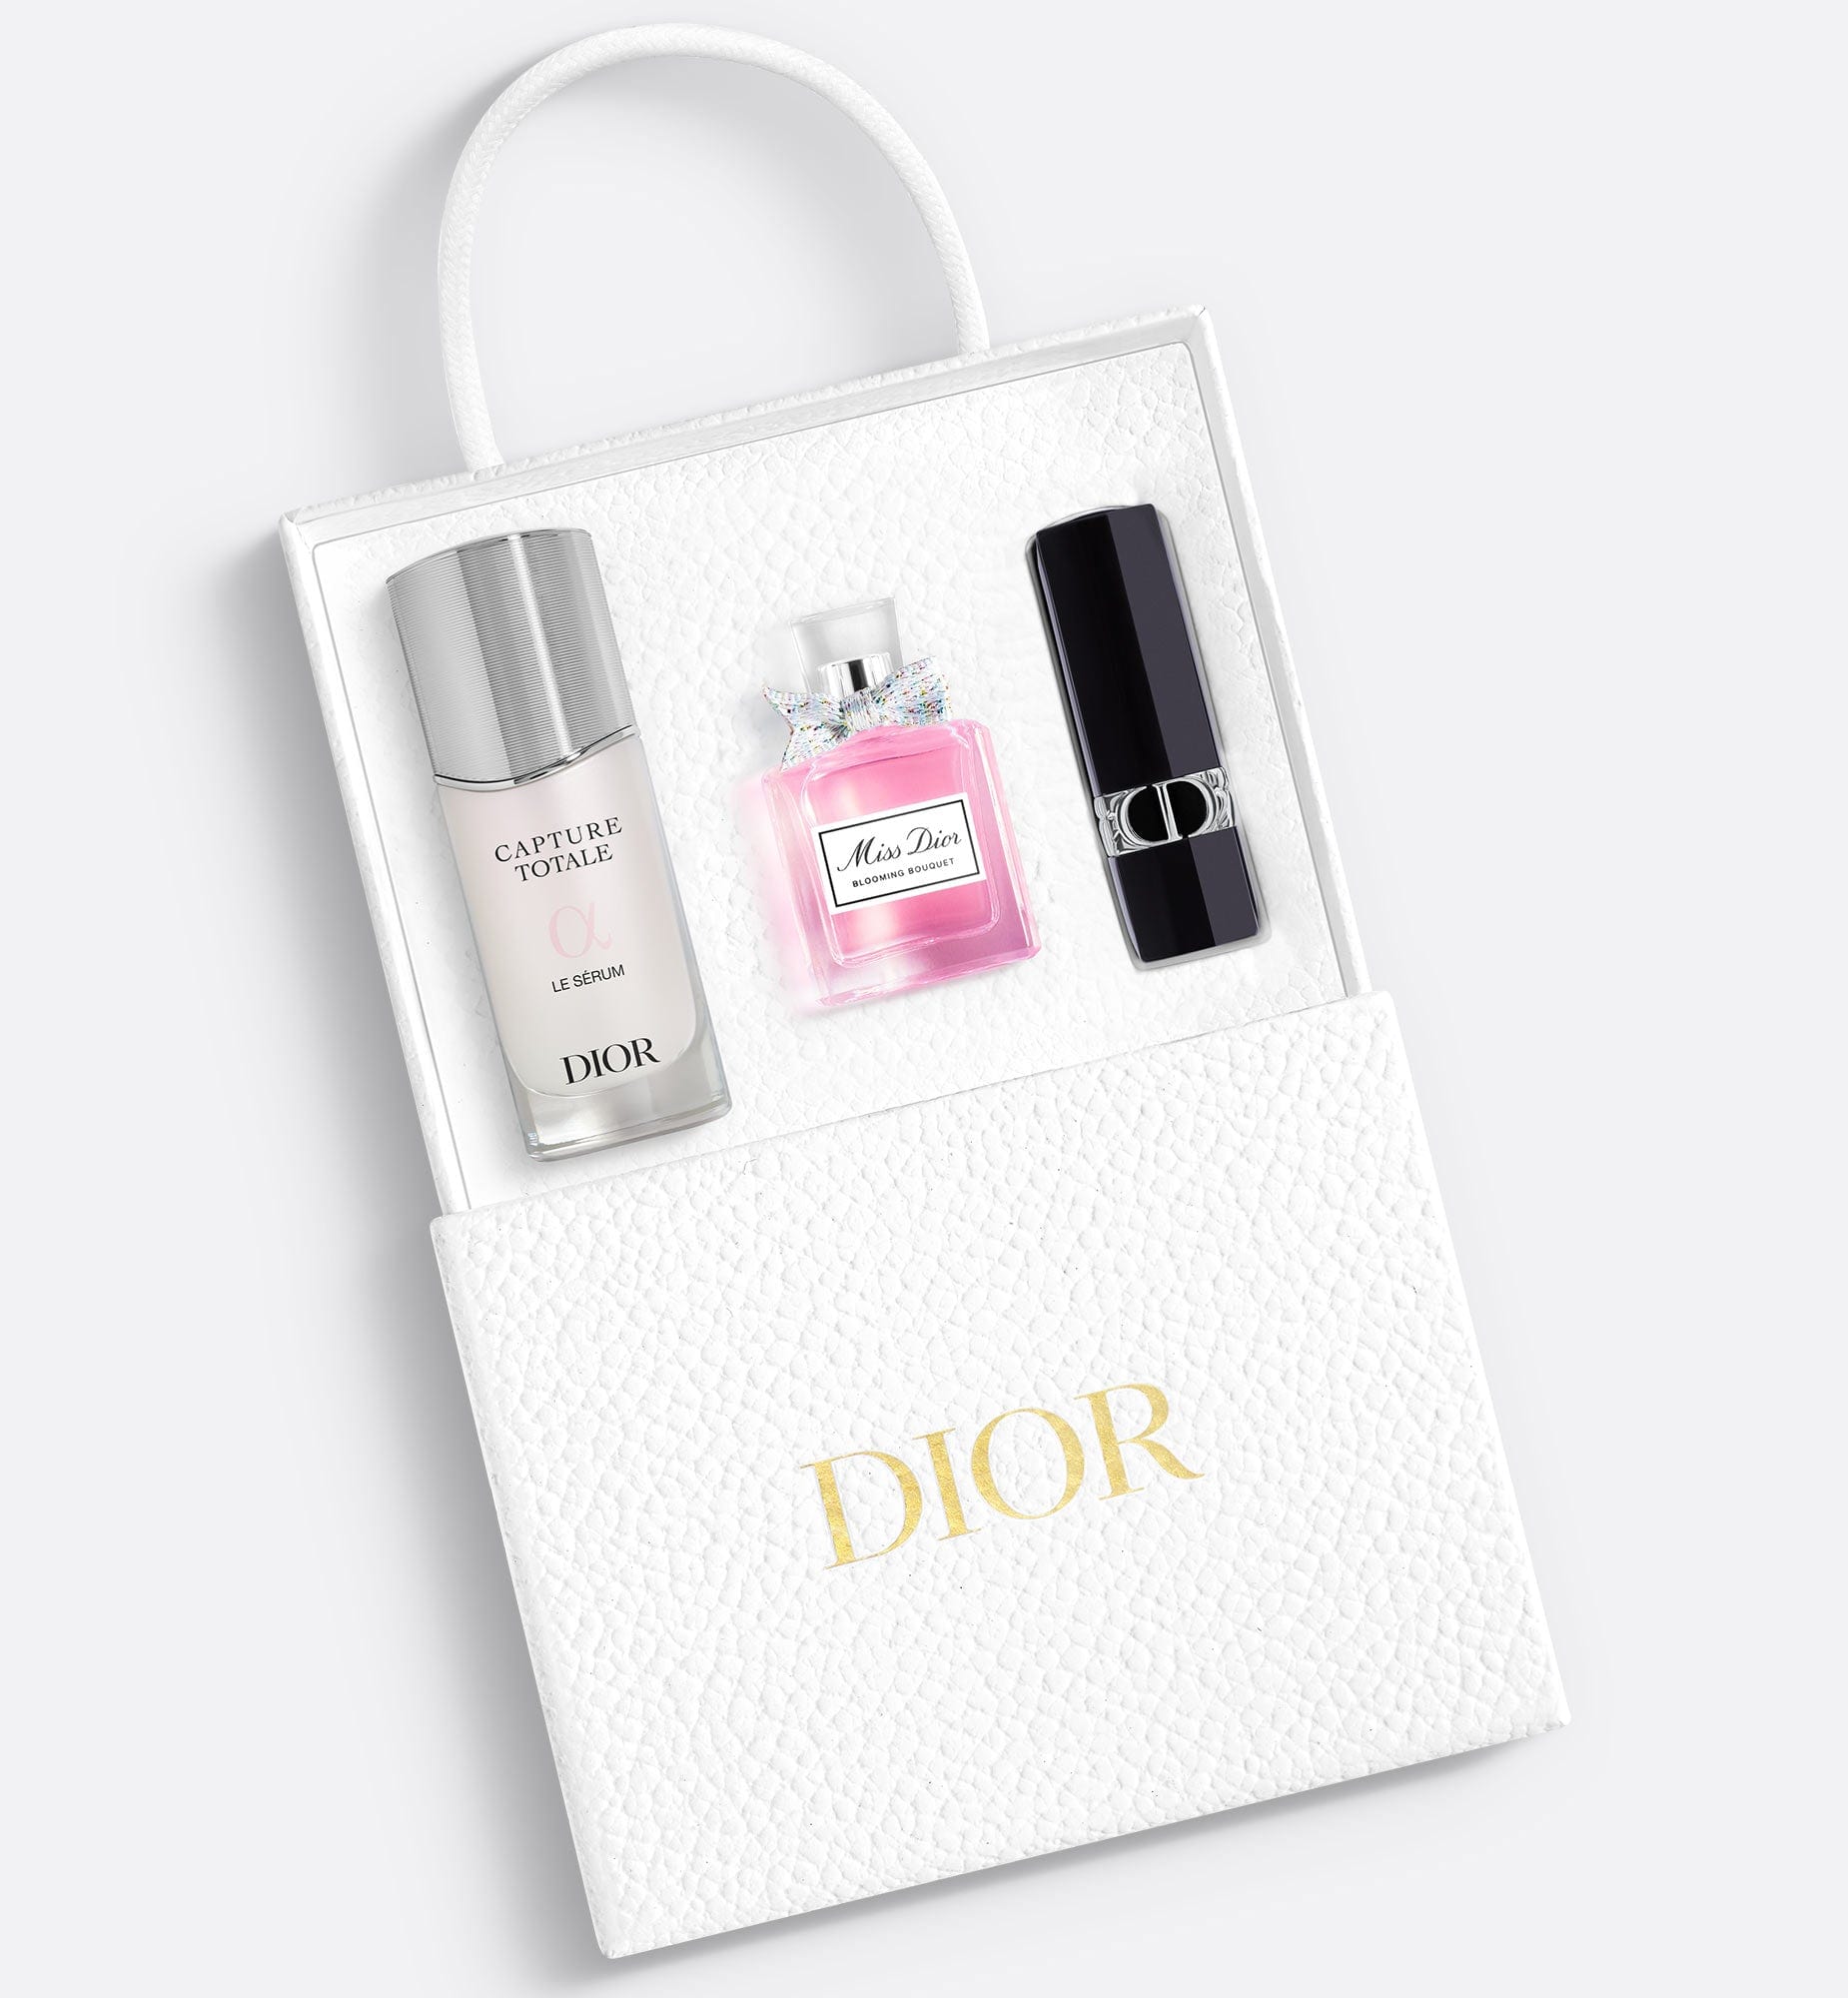 Iconic Beauty Discovery Set | Makeup, Skincare and Fragrance Set - 3 Products